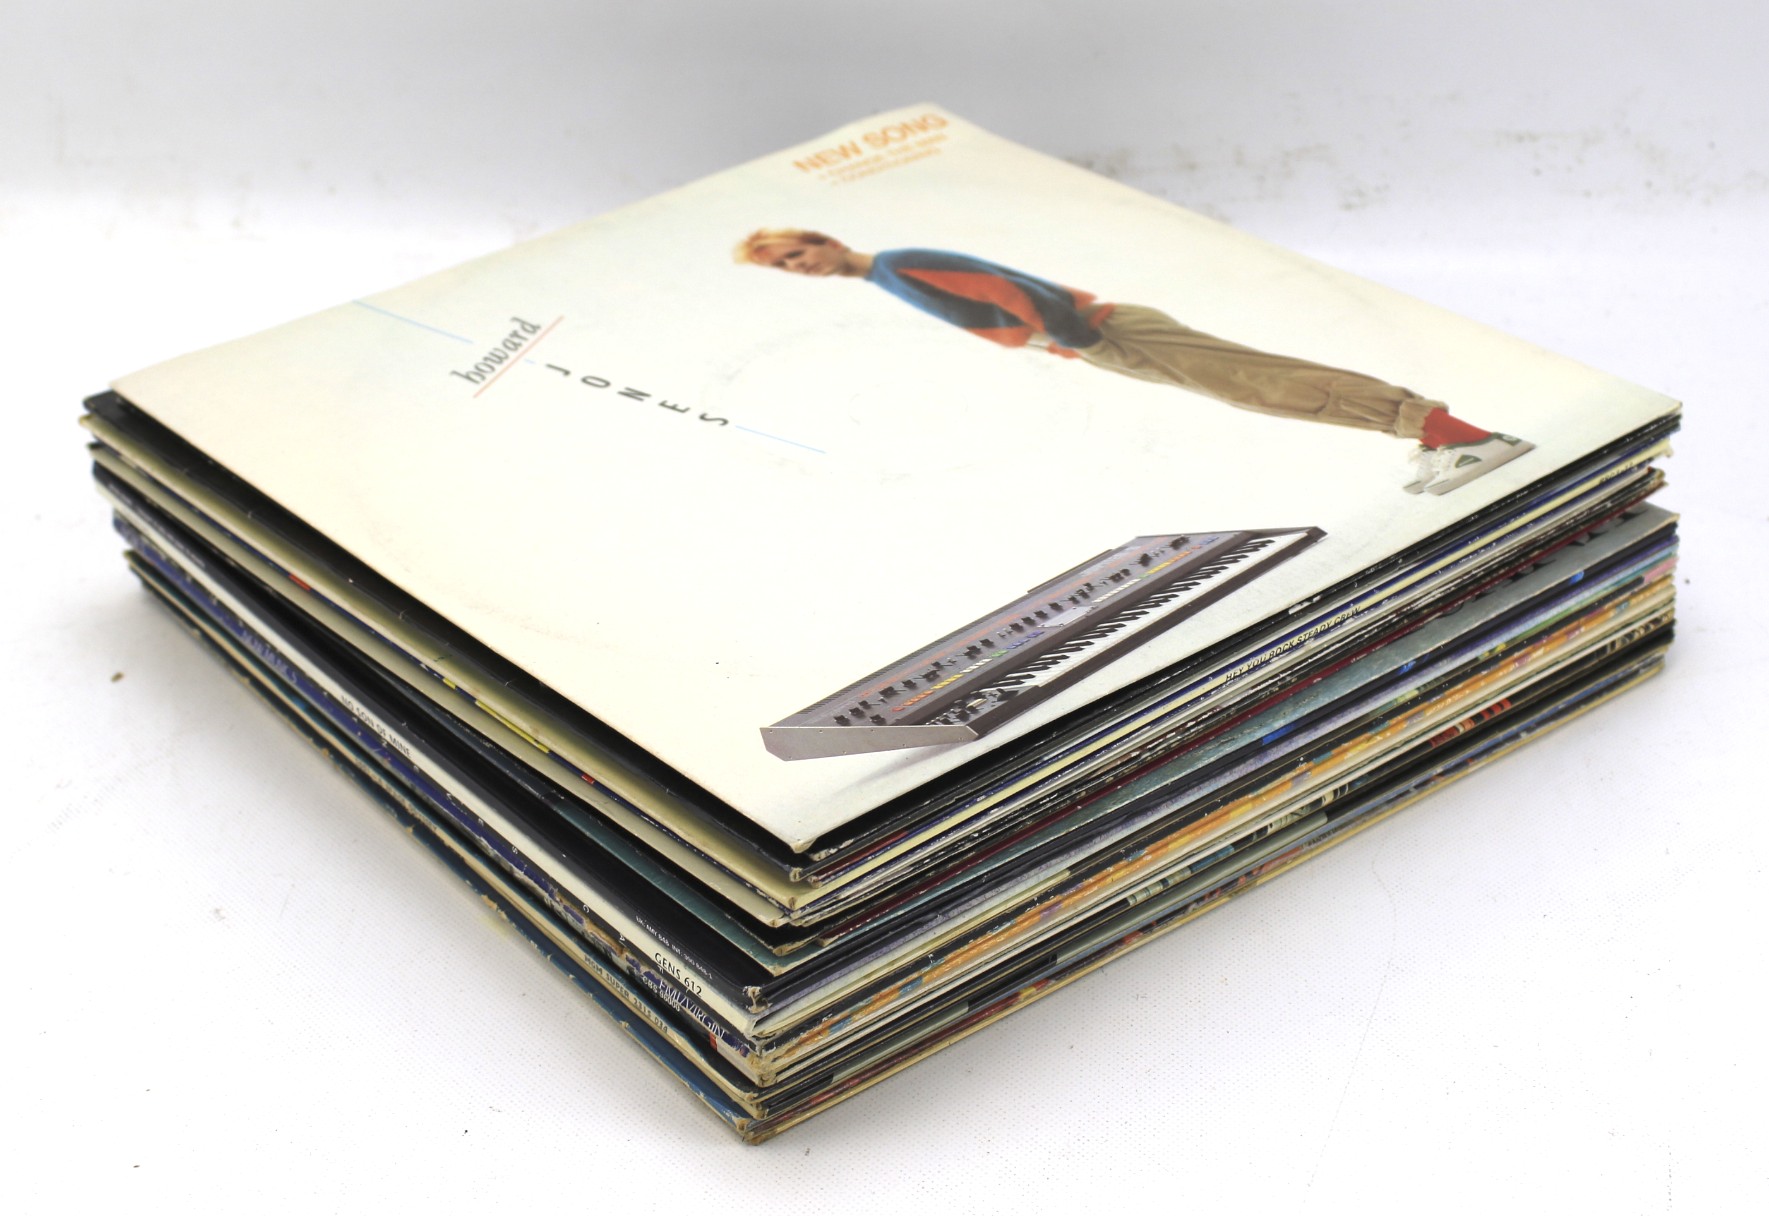 A collection of vinyl albums.